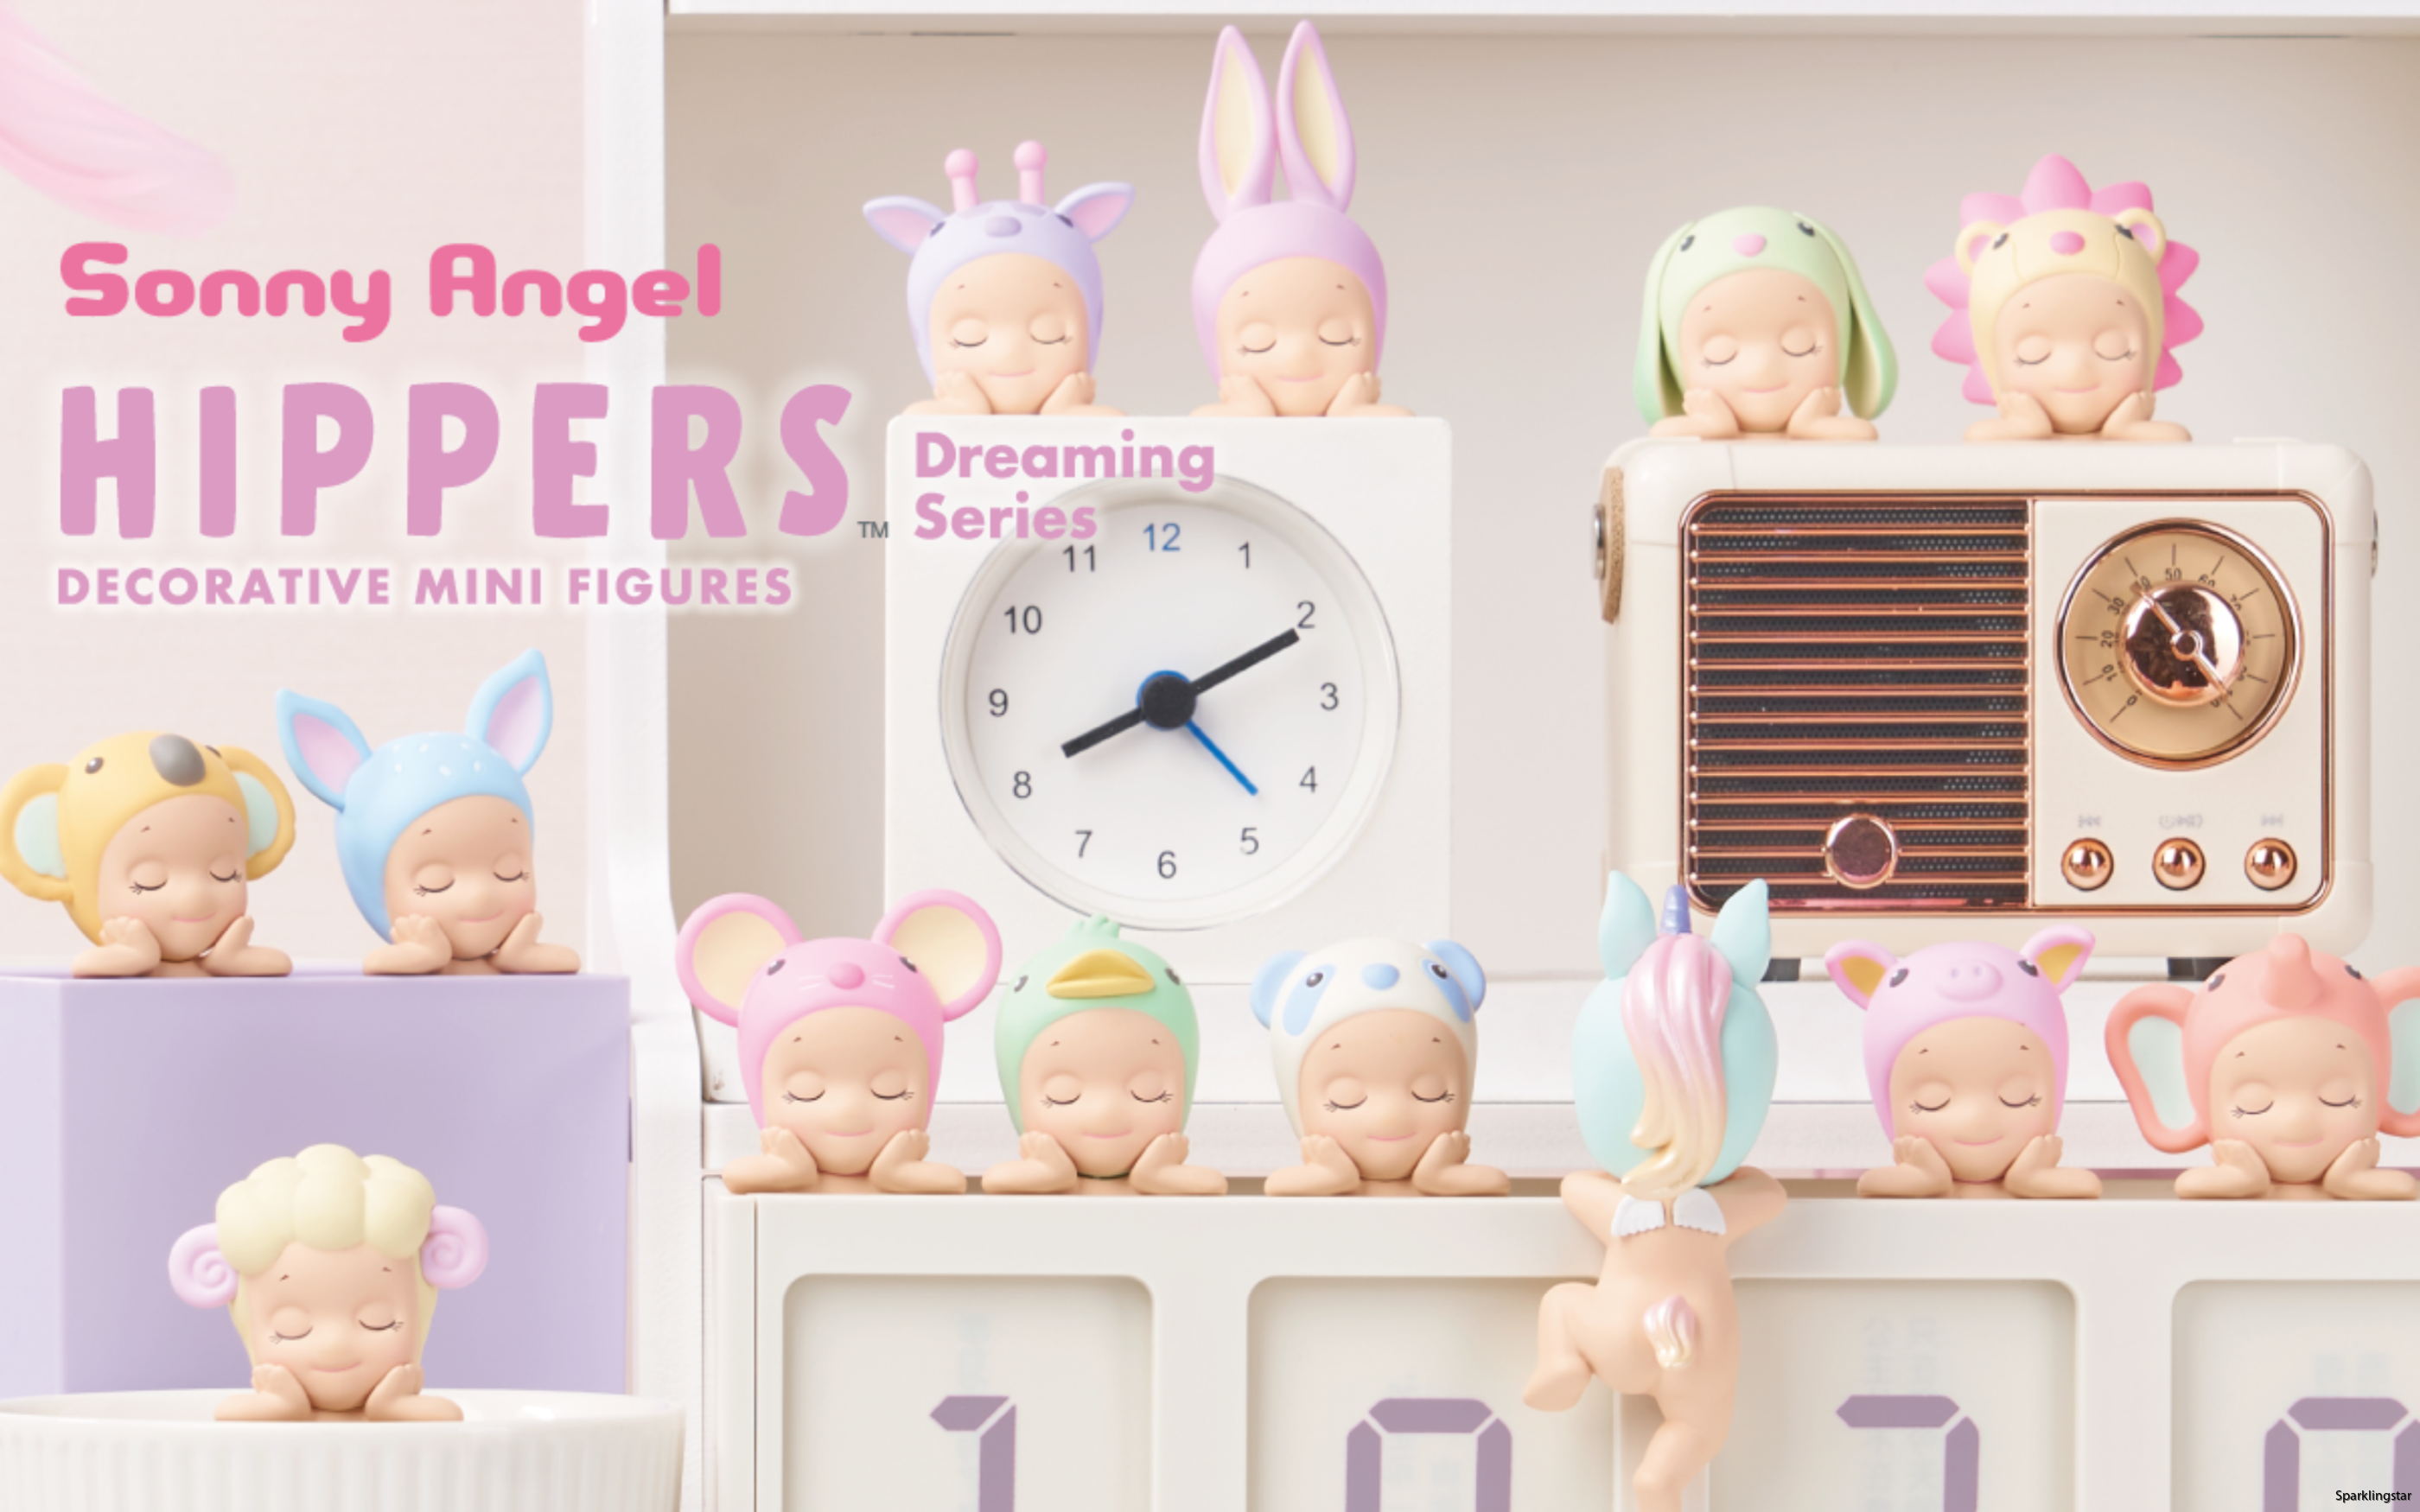 Sonny Angel Hippers Dreaming Series